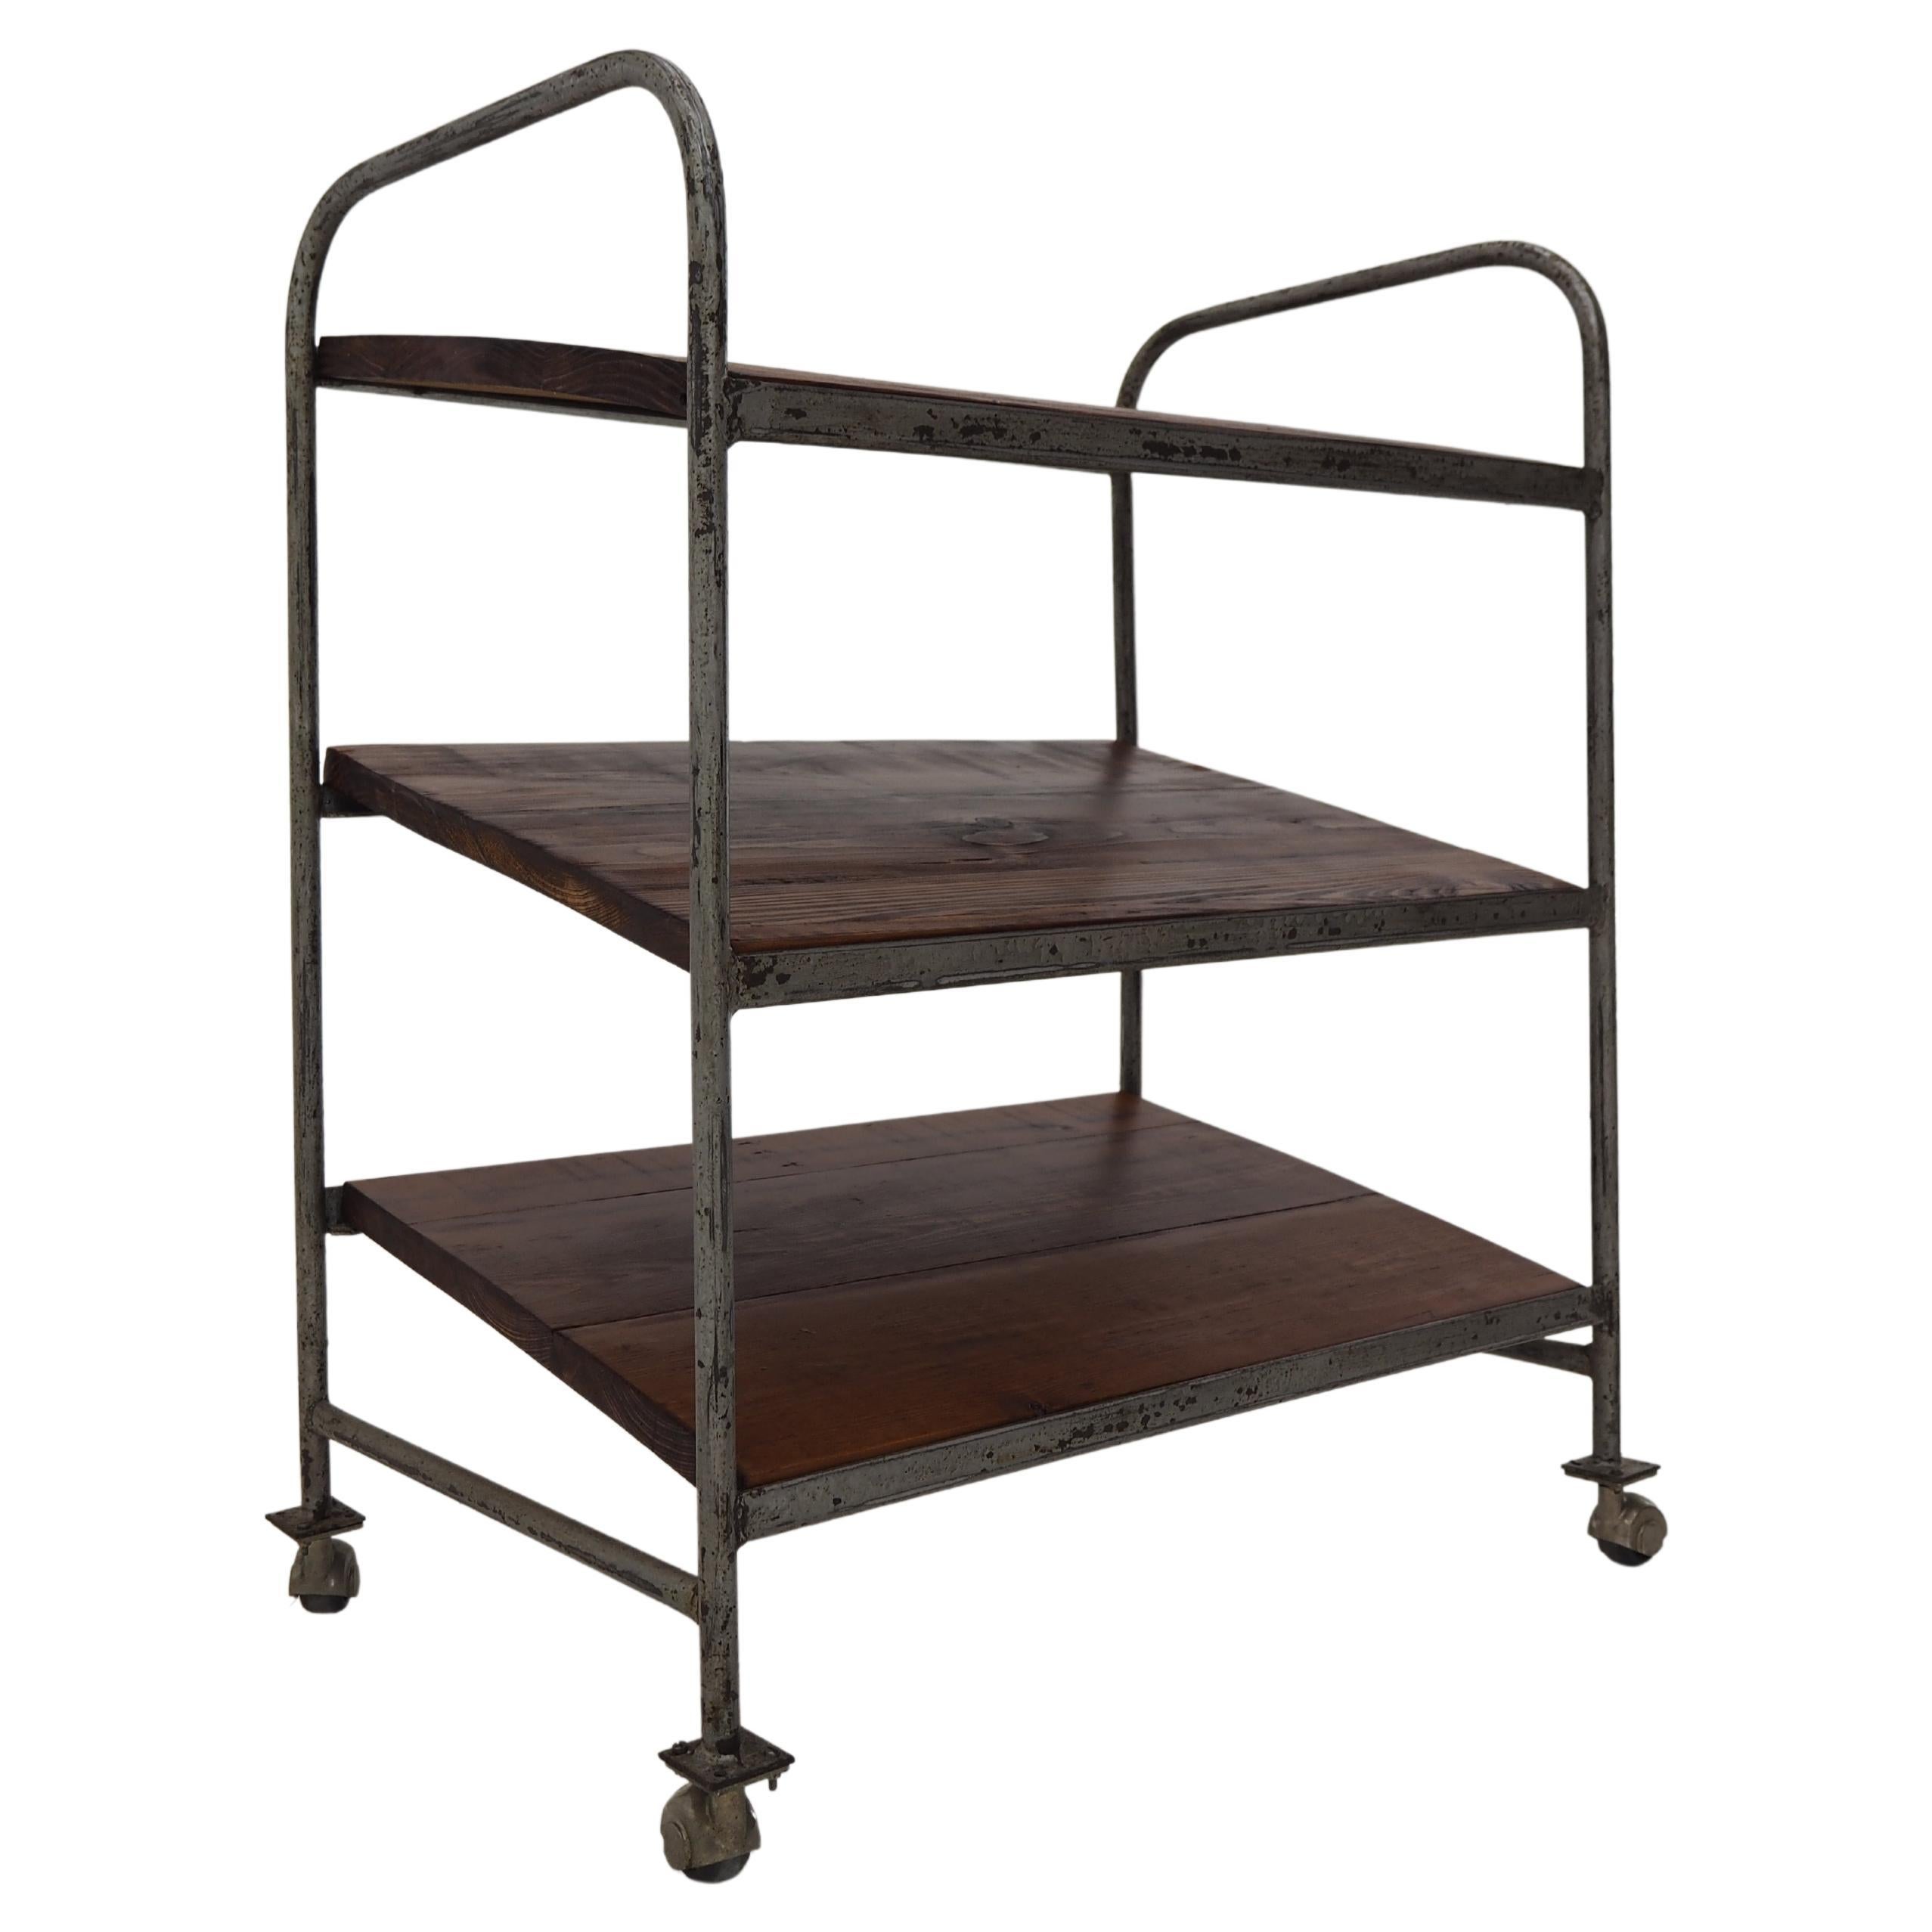 Midcentury Industrial Shelves, Trolley For Sale